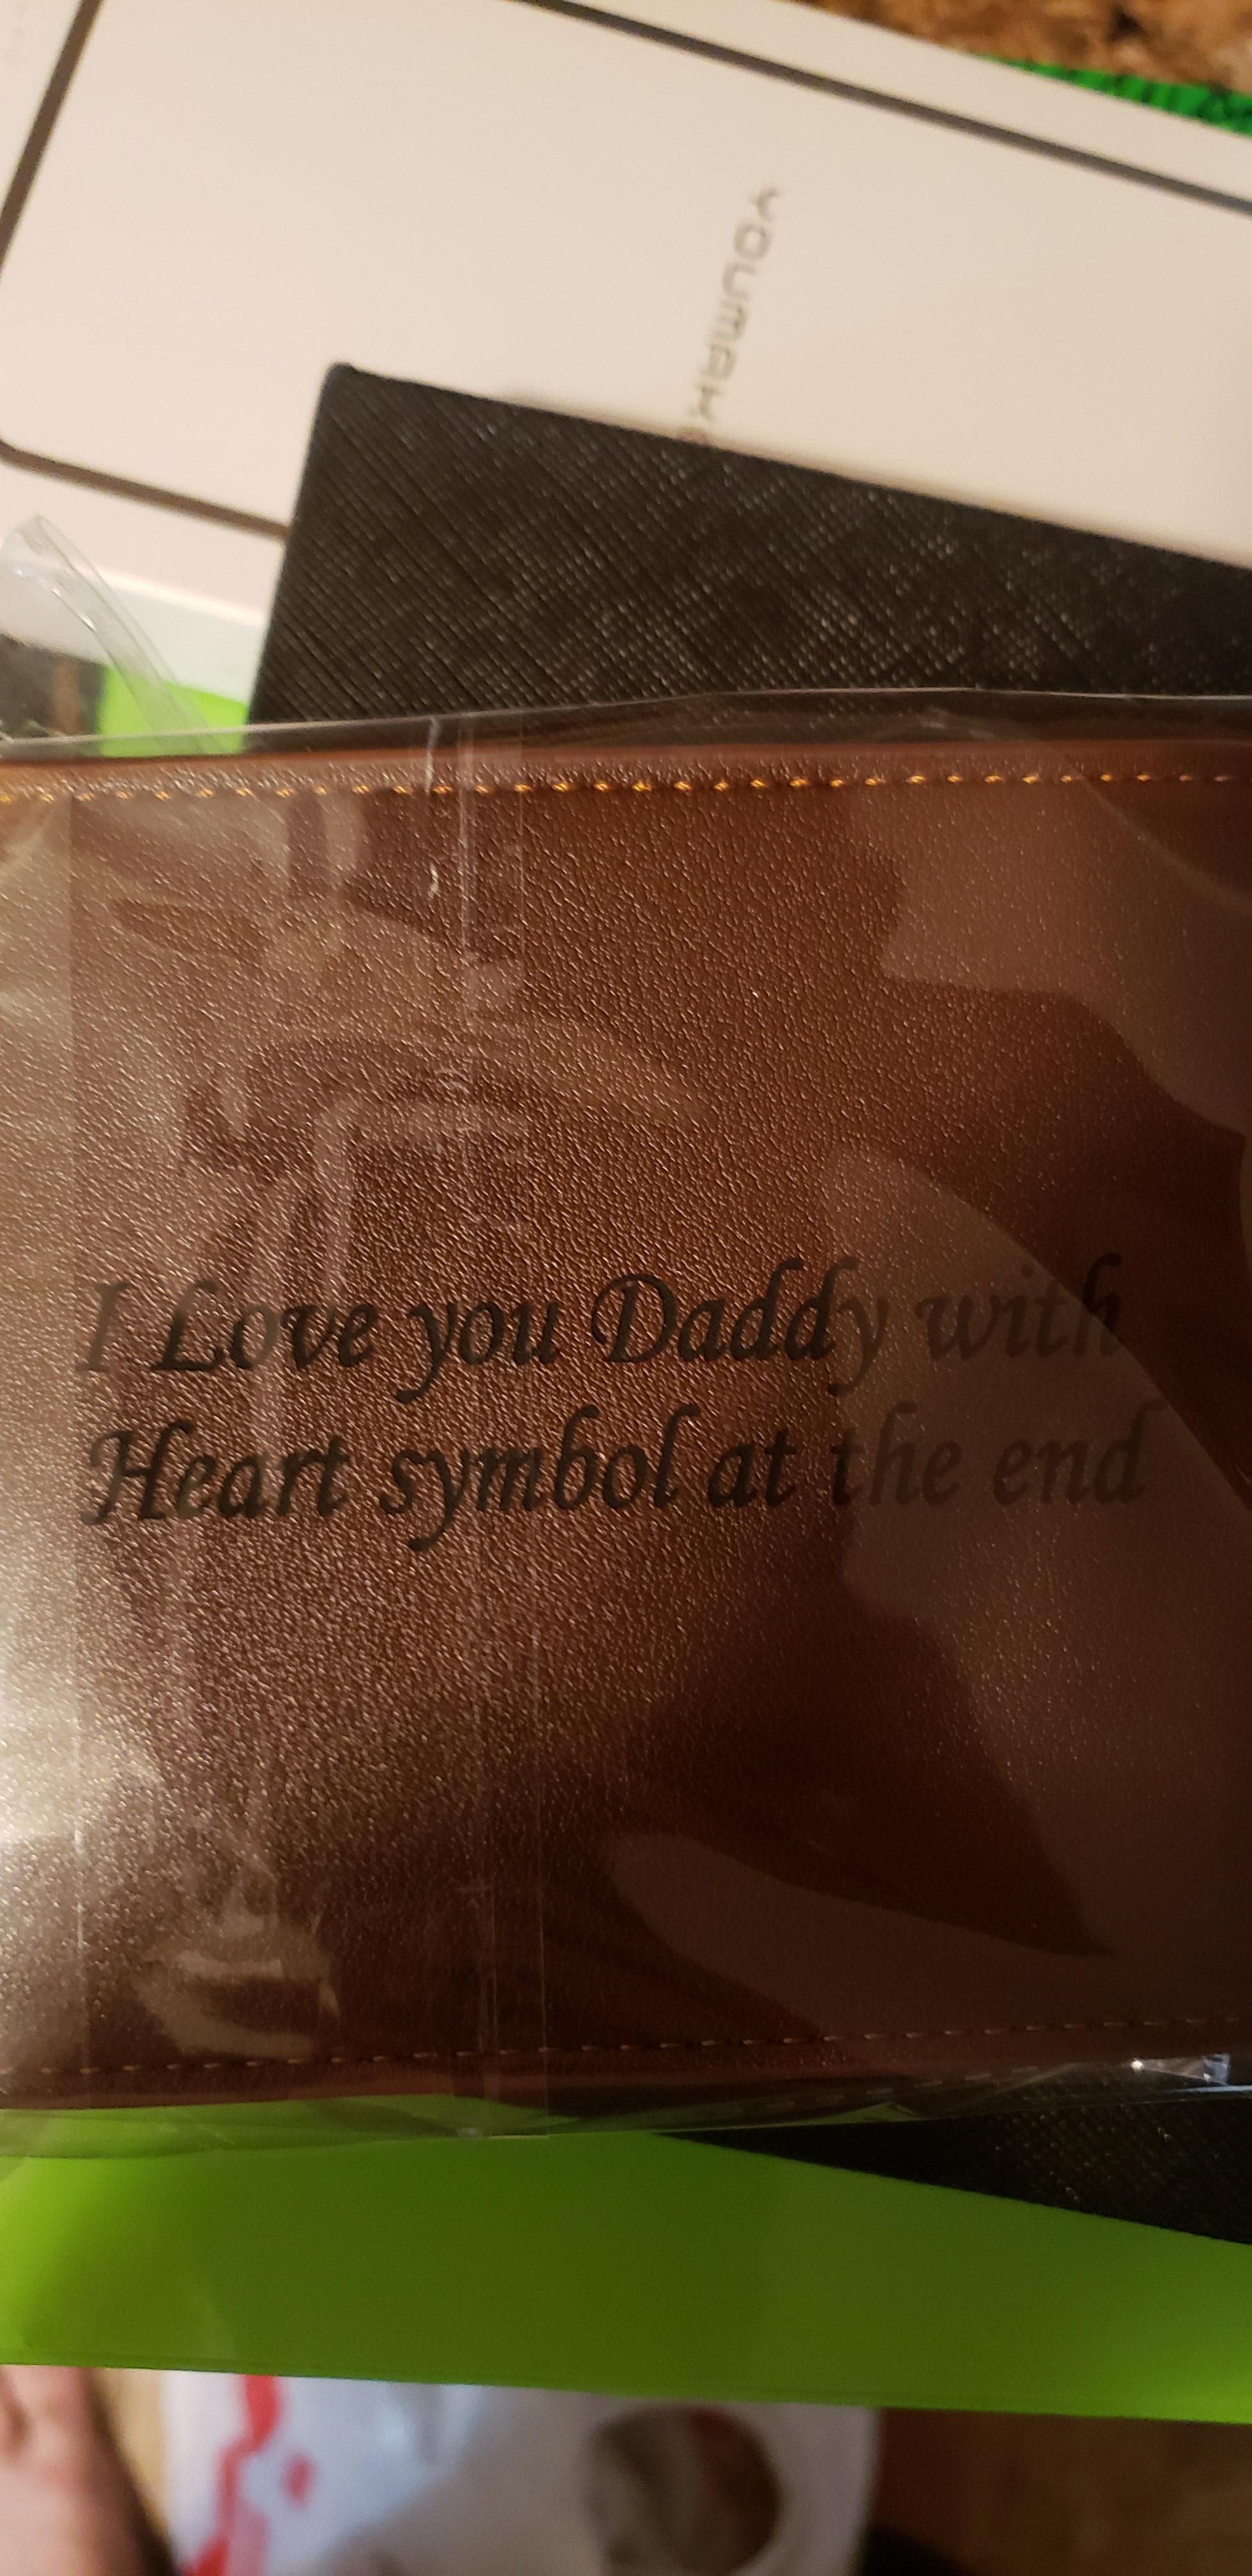 My first Christmas as a father, this was the personalized gift I received. I love it, with a heart symbol at the end!